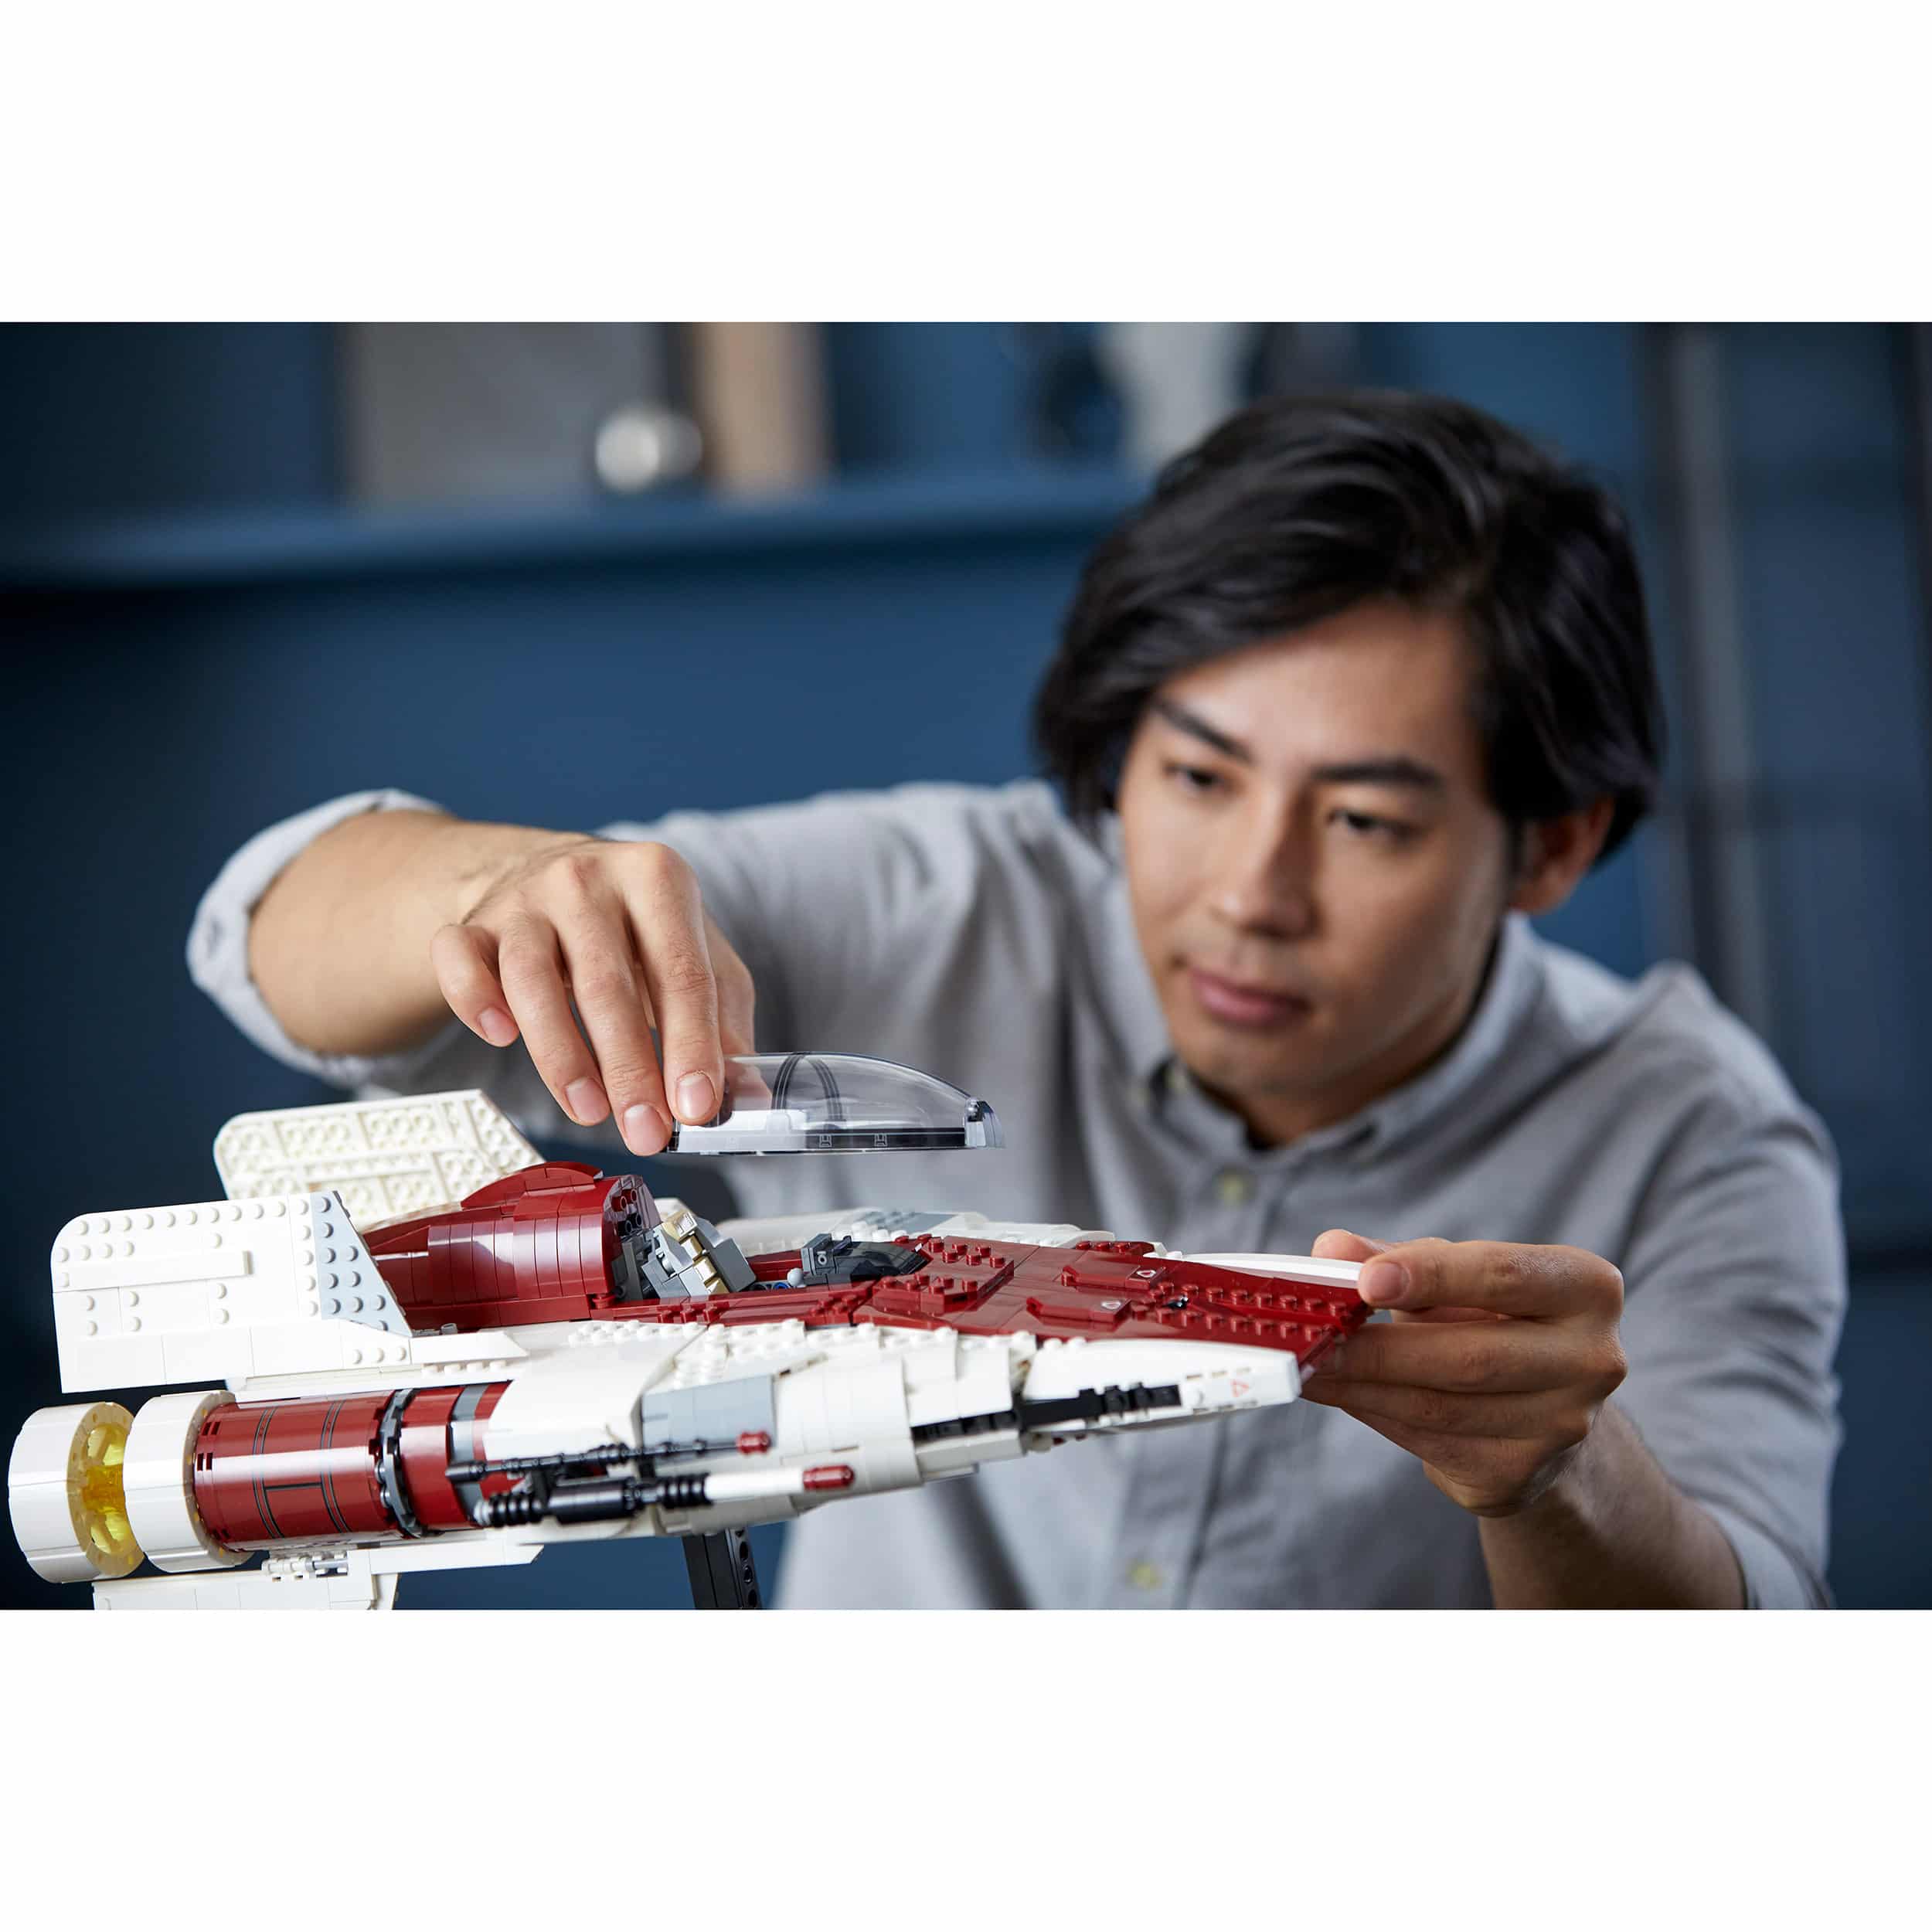 LEGO - Ultimate Collectors 75275 - Star Wars A-Wing Starfighter